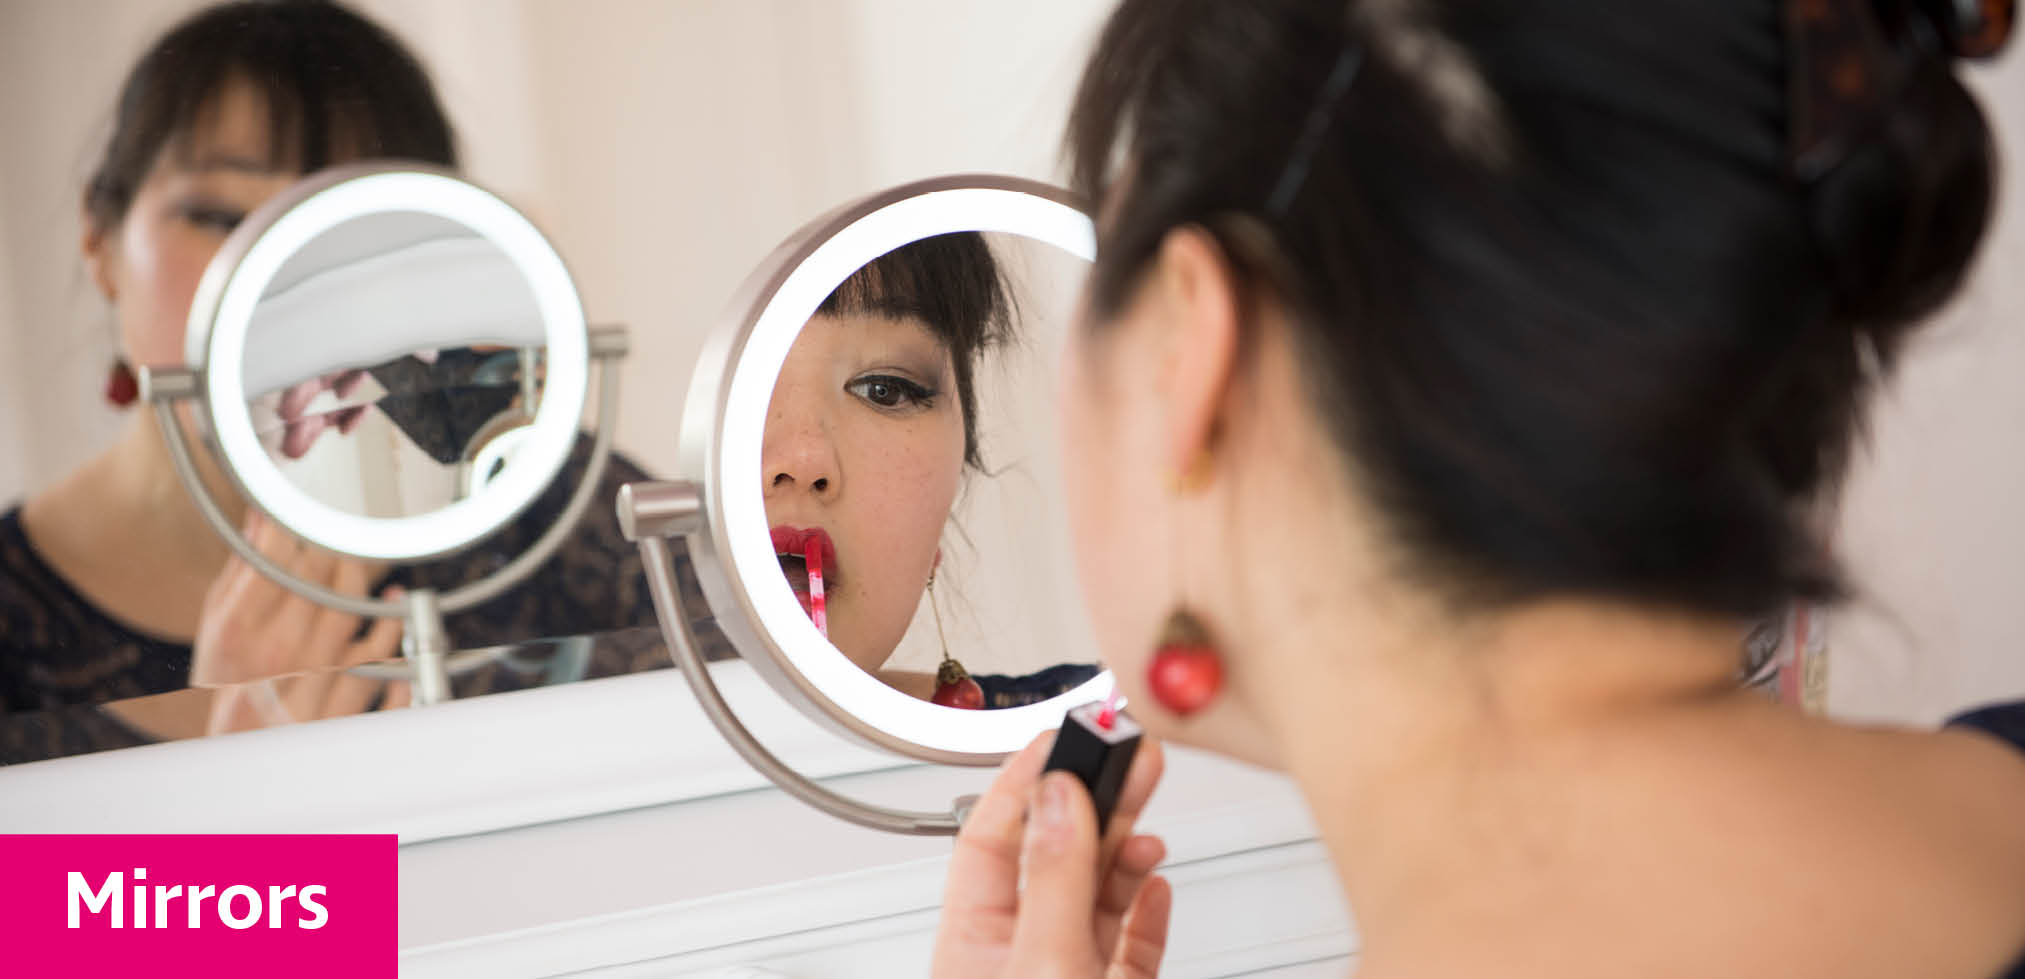 A young woman using a magnifying mirror to apply lipstick